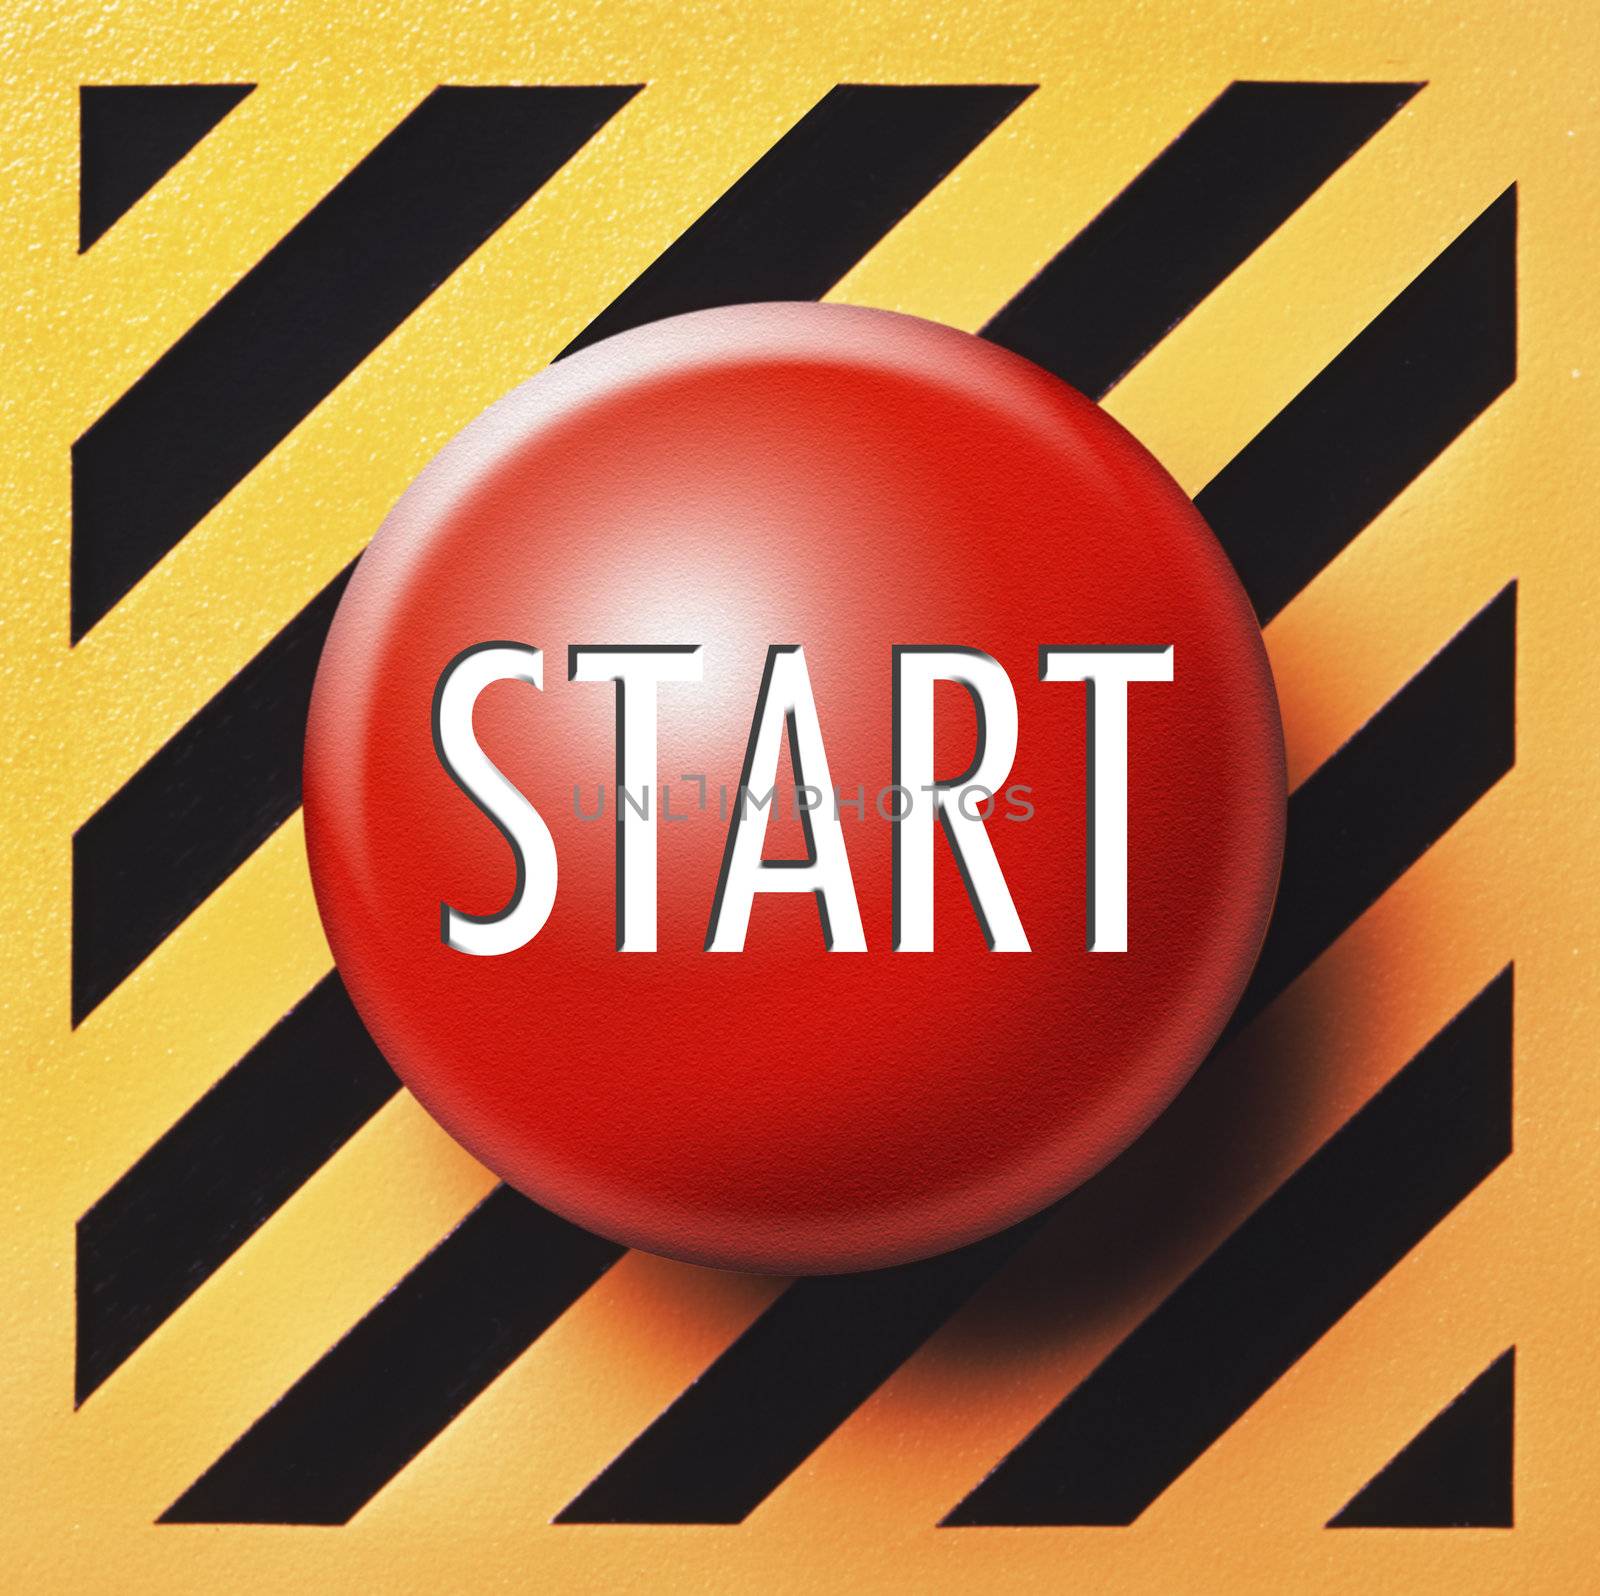 Start button in red with white type on black and orange background